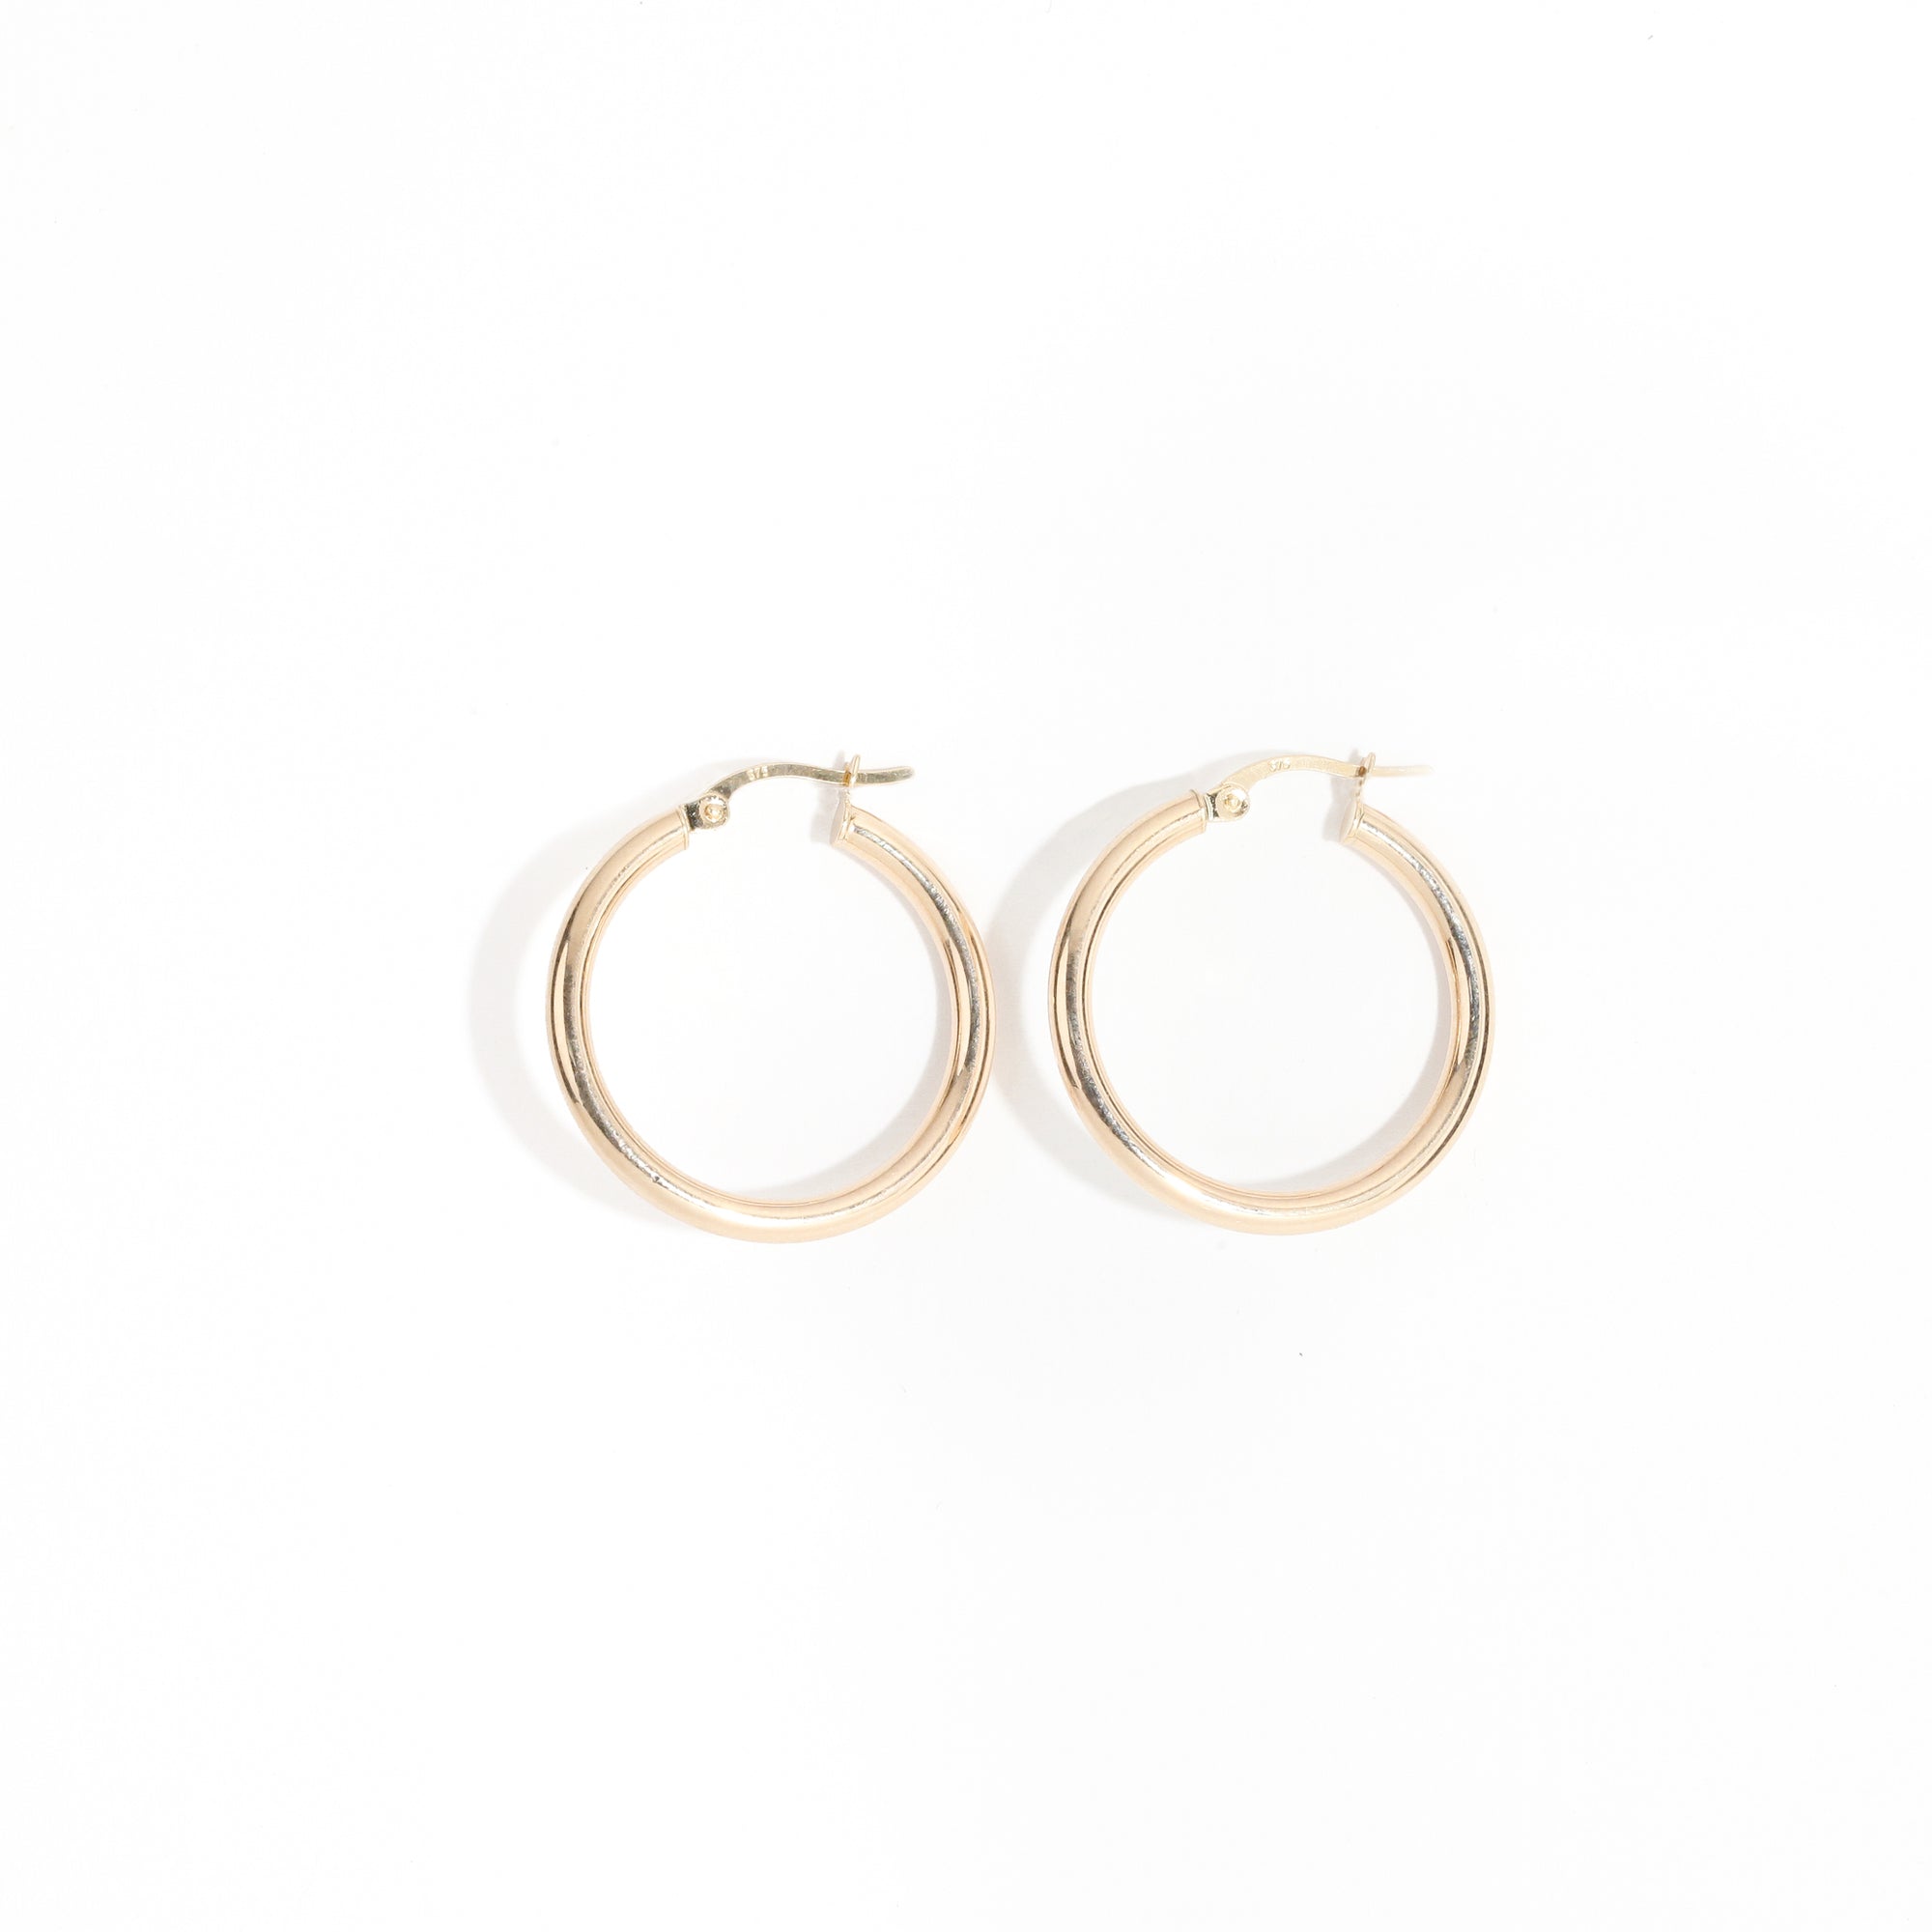 Classic 9 carat yellow gold hoops. 